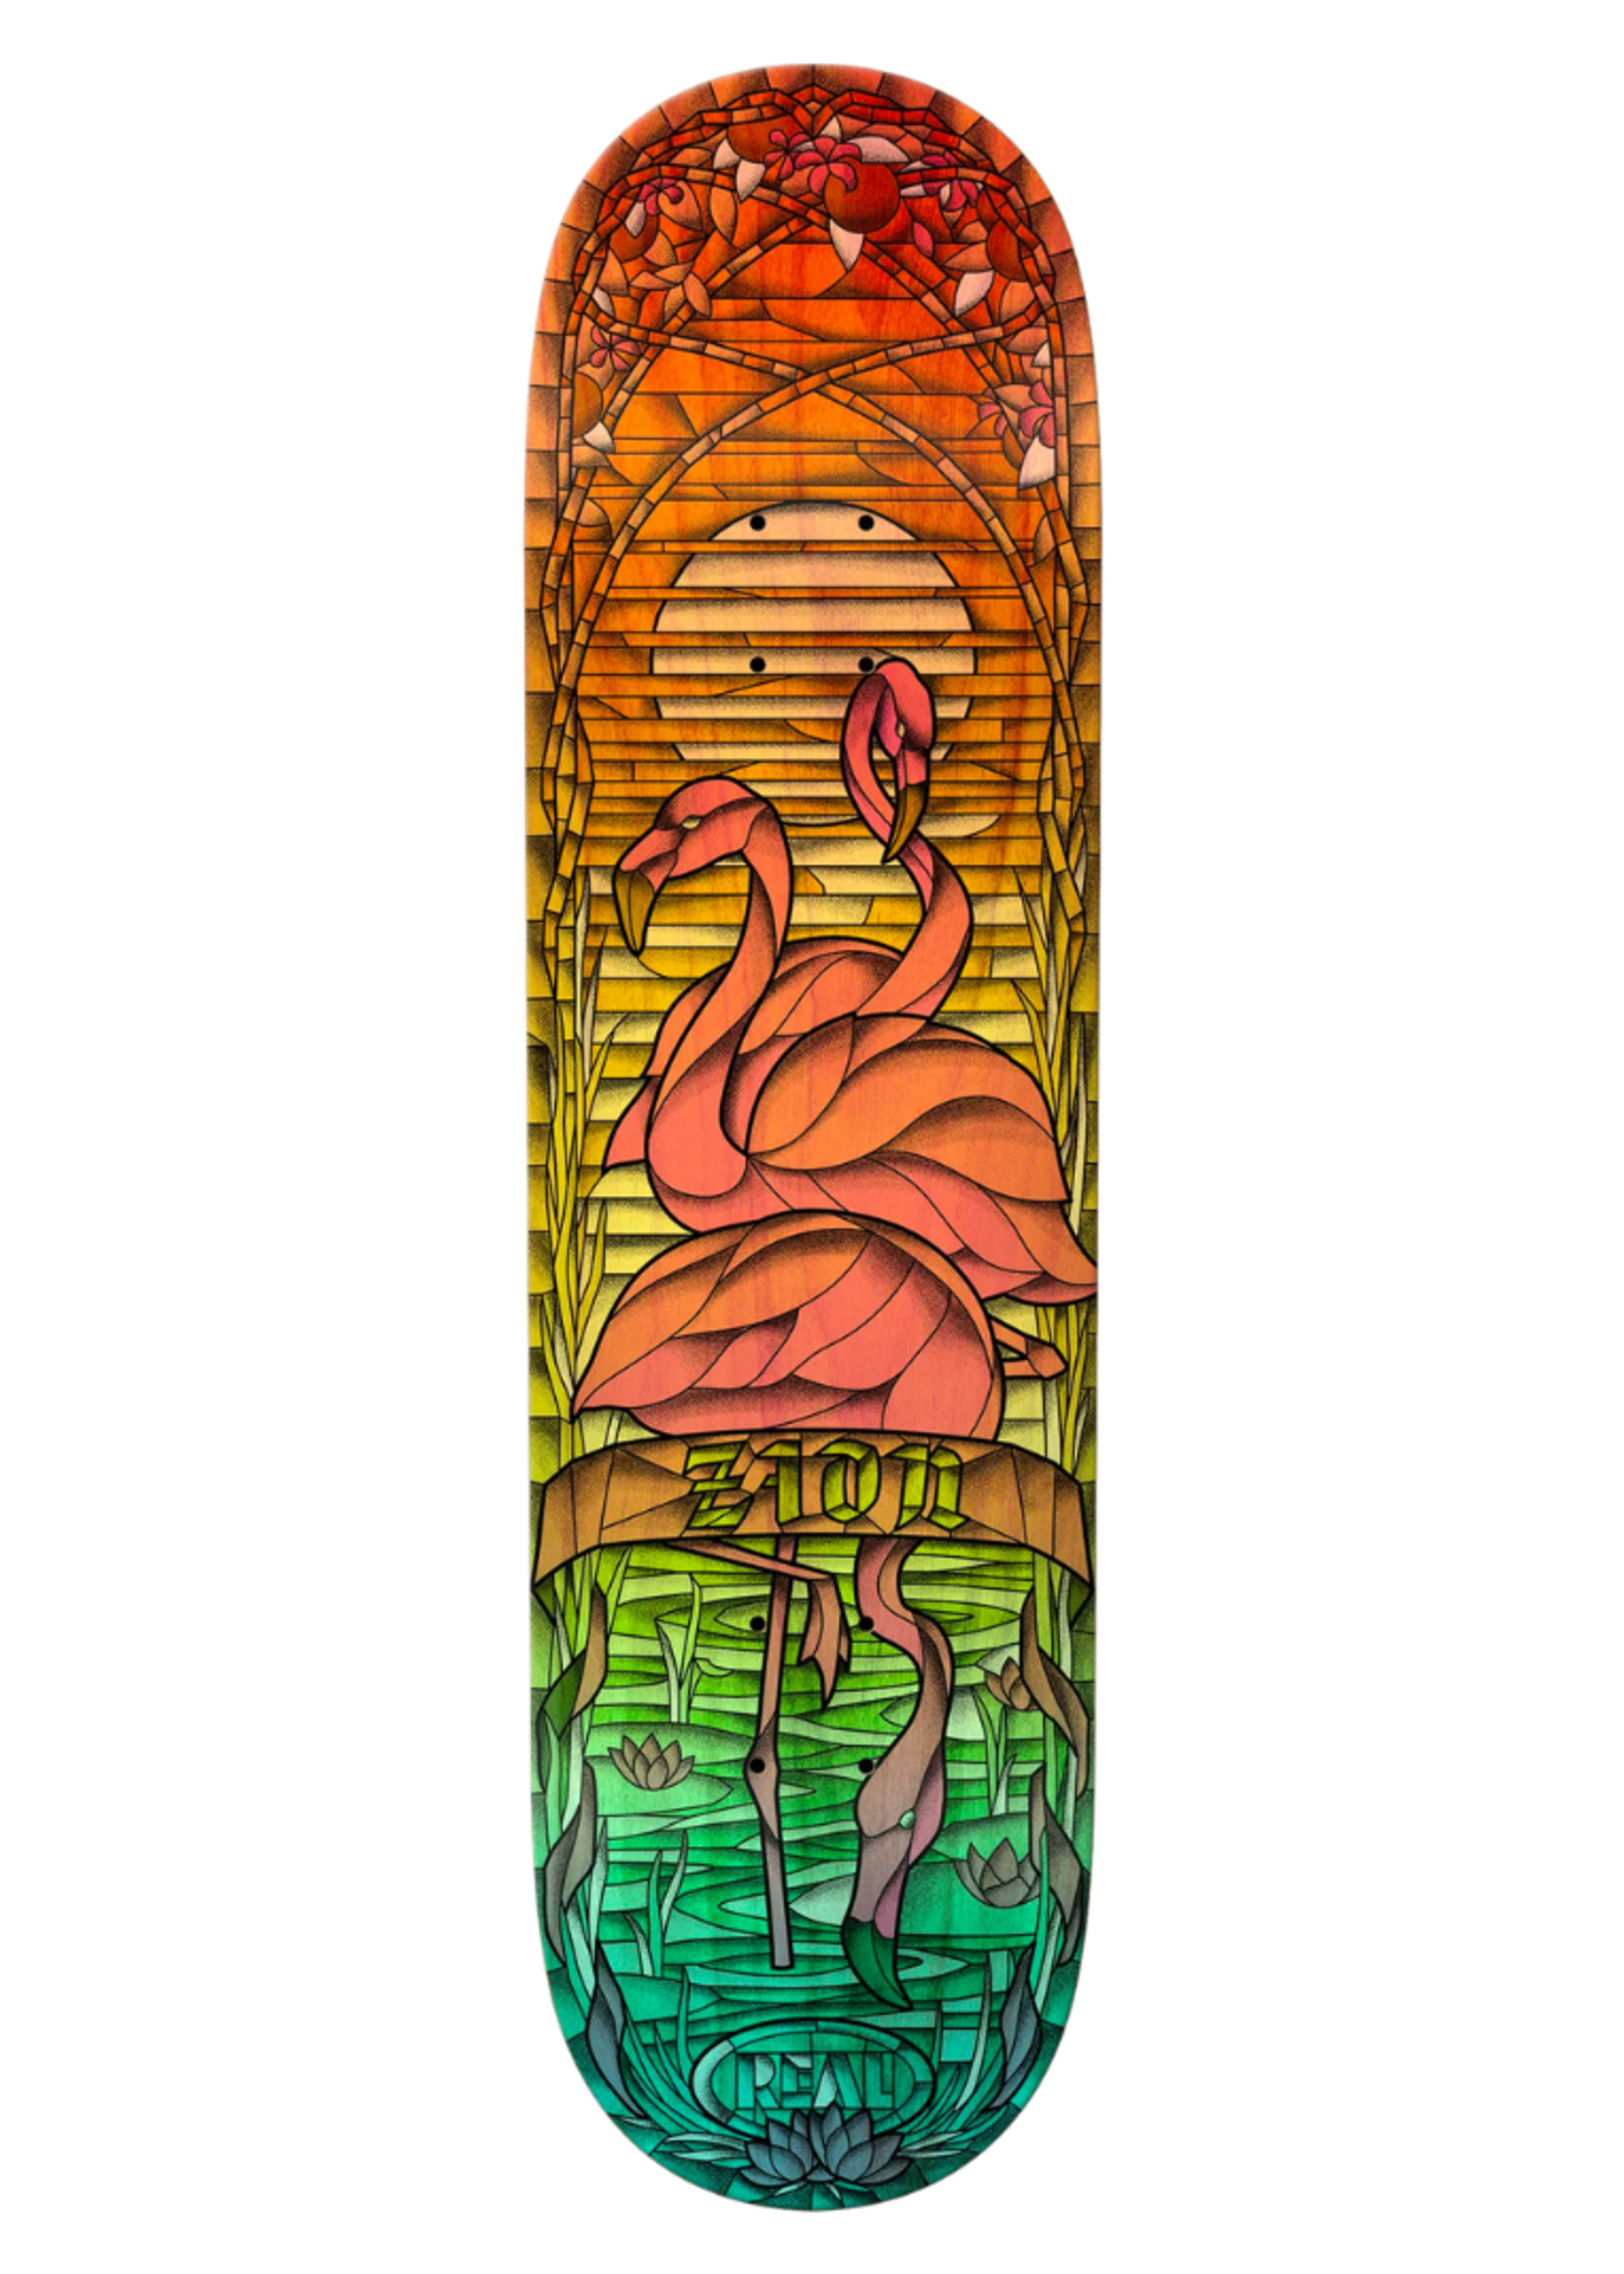 REAL ZION CHROMATIC CATHEDRAL FULL SE 8.38" DECK